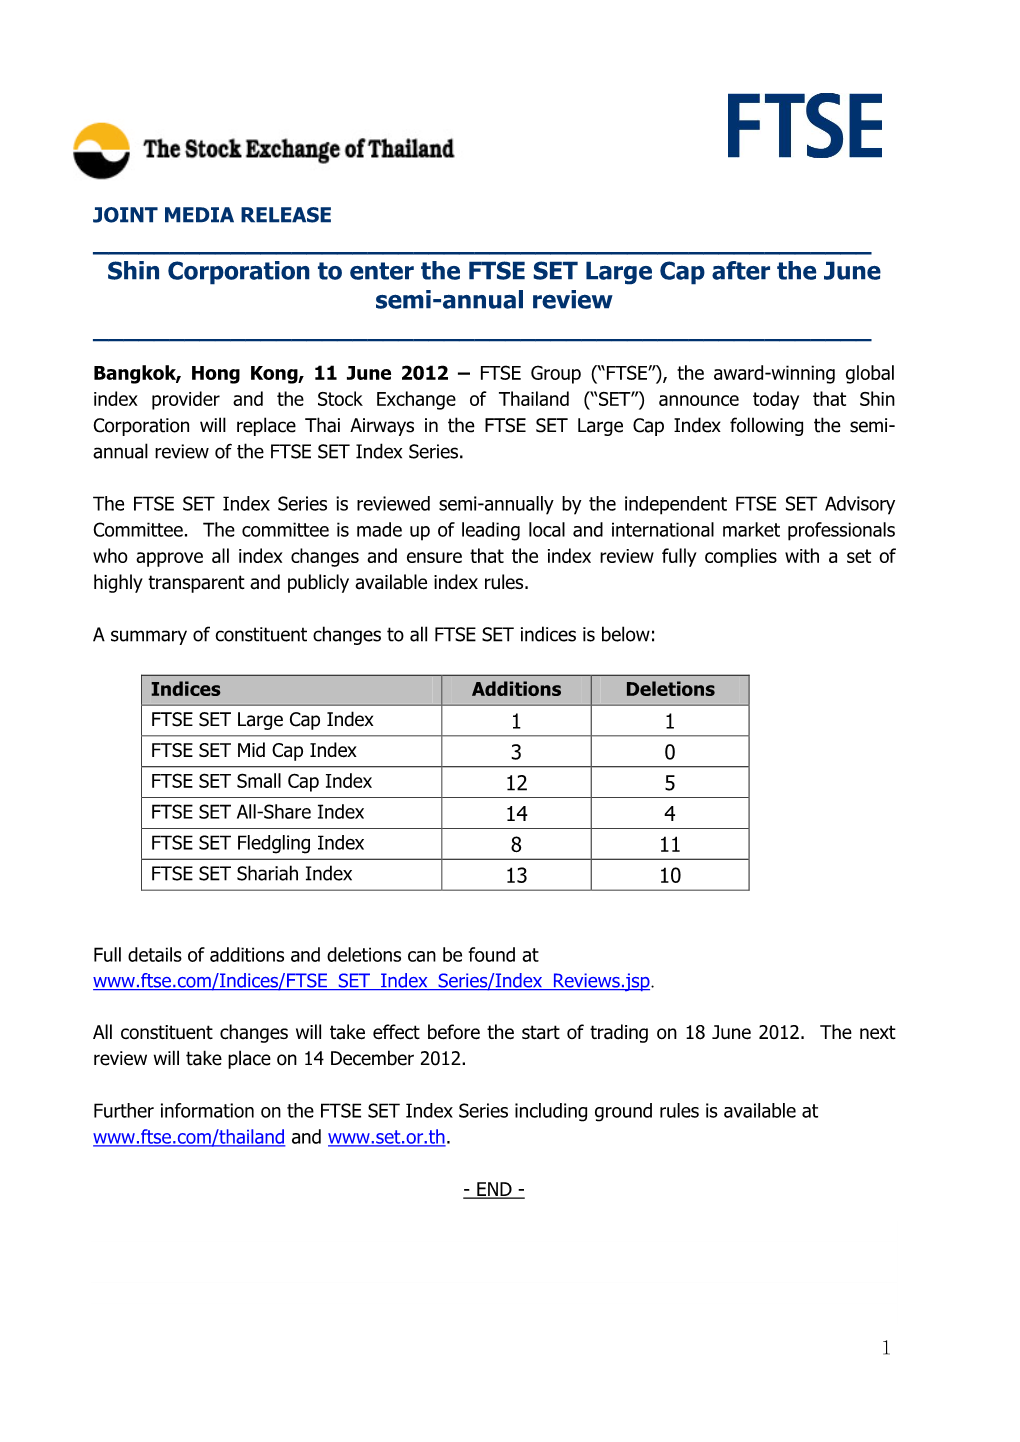 Shin Corporation to Enter the FTSE SET Large Cap After the June Semi-Annual Review ______